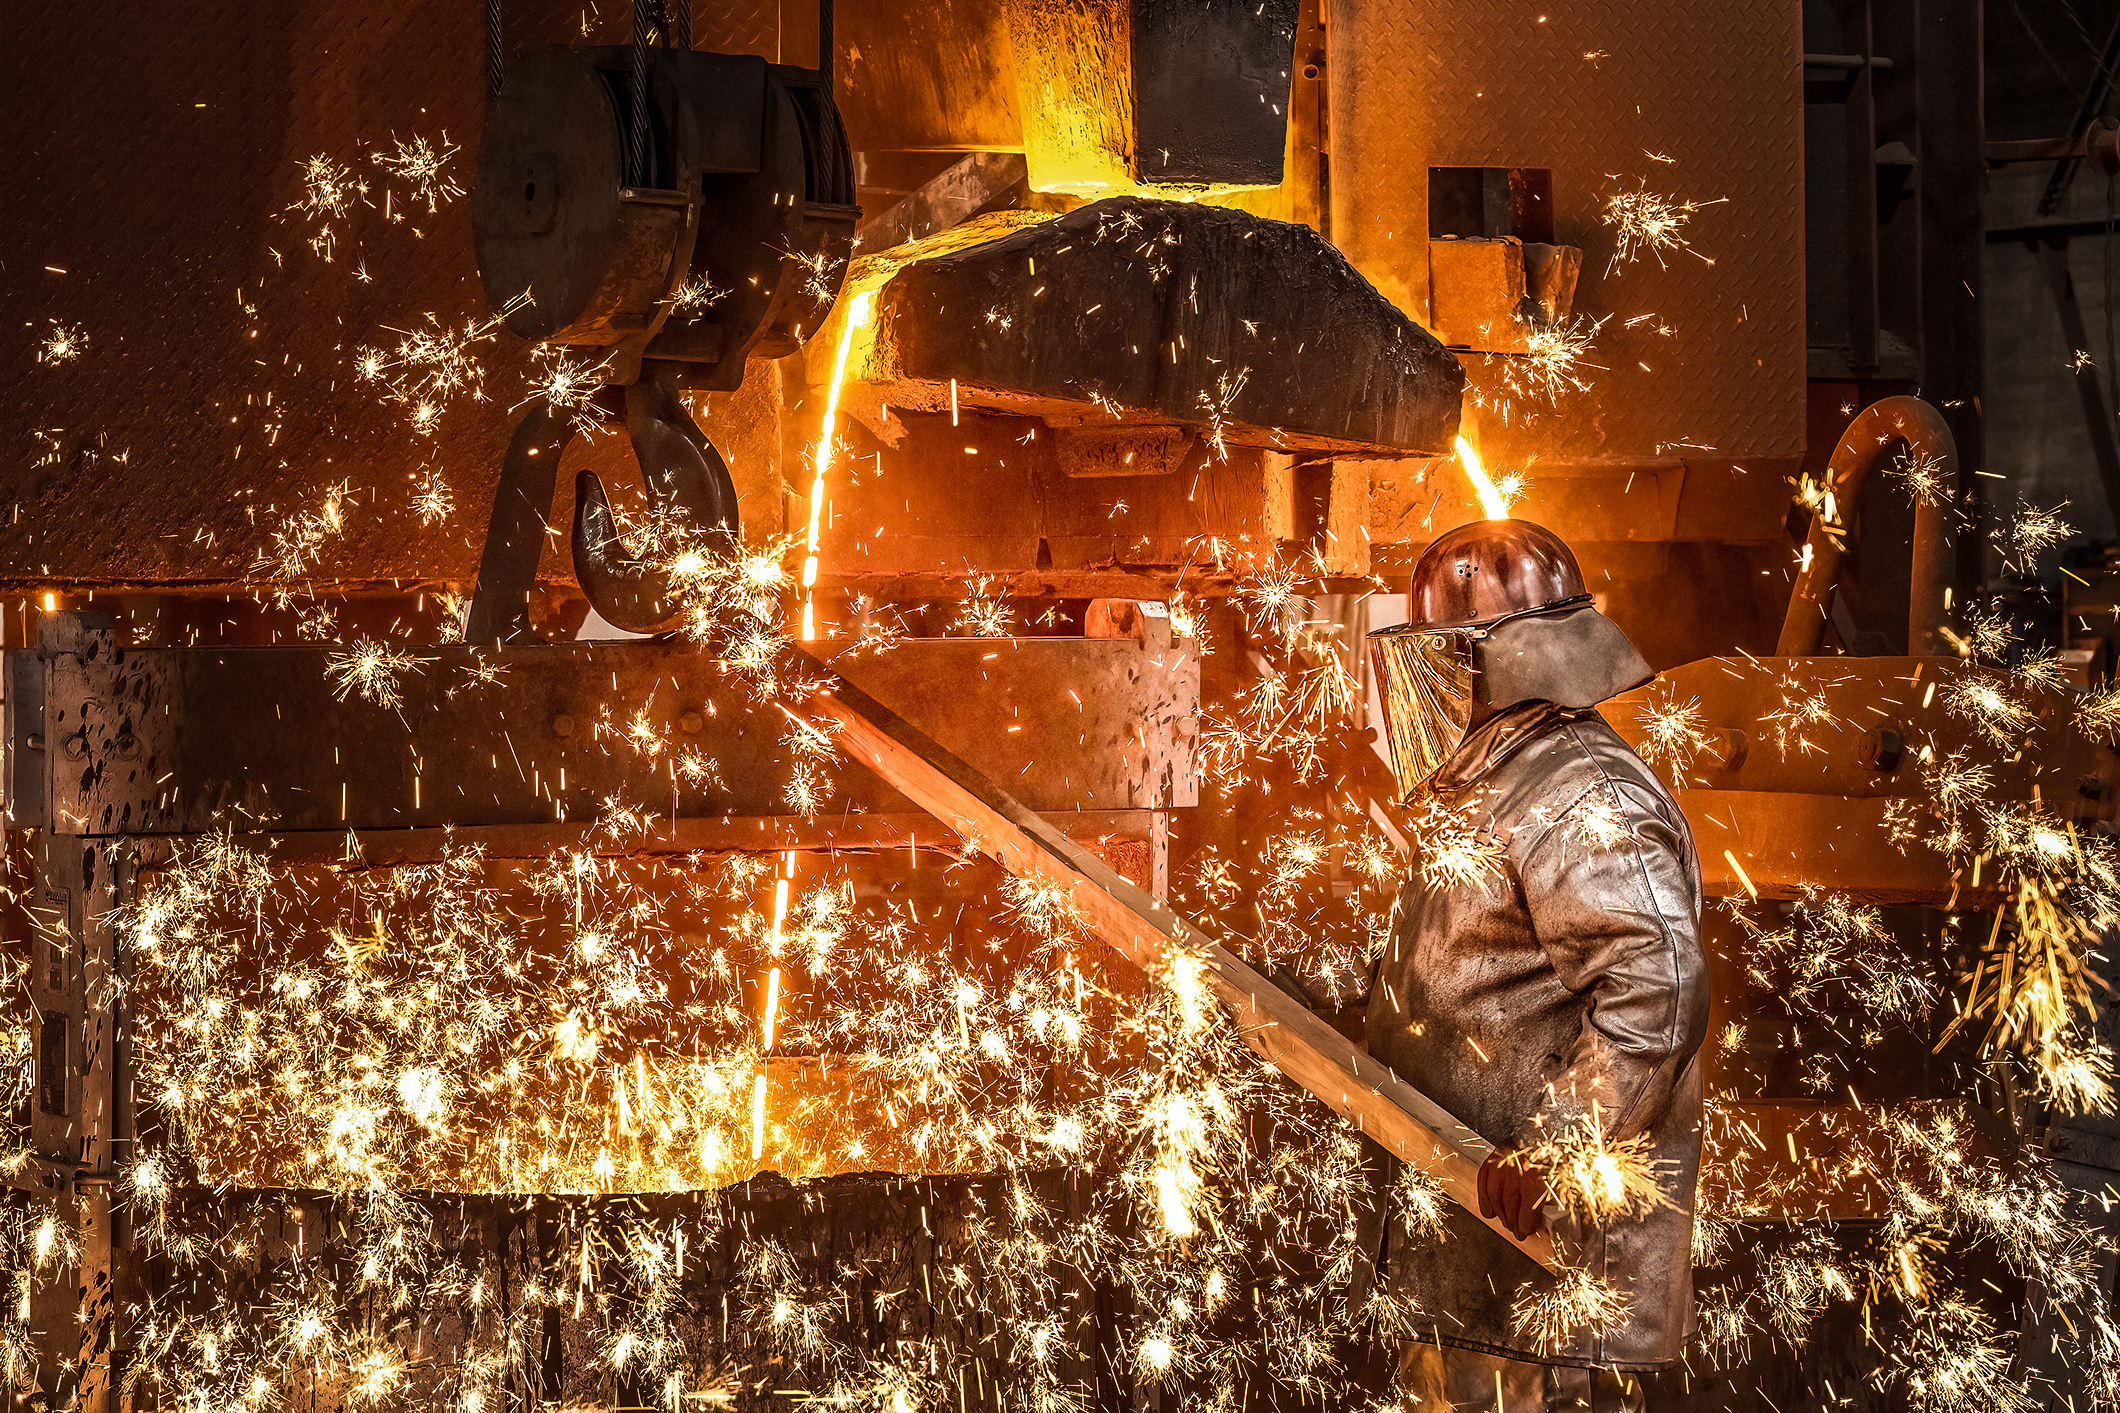 "Starry Rush" is a picture from my photo project "Foundry", in which I accompanied the work steps in a foundry.